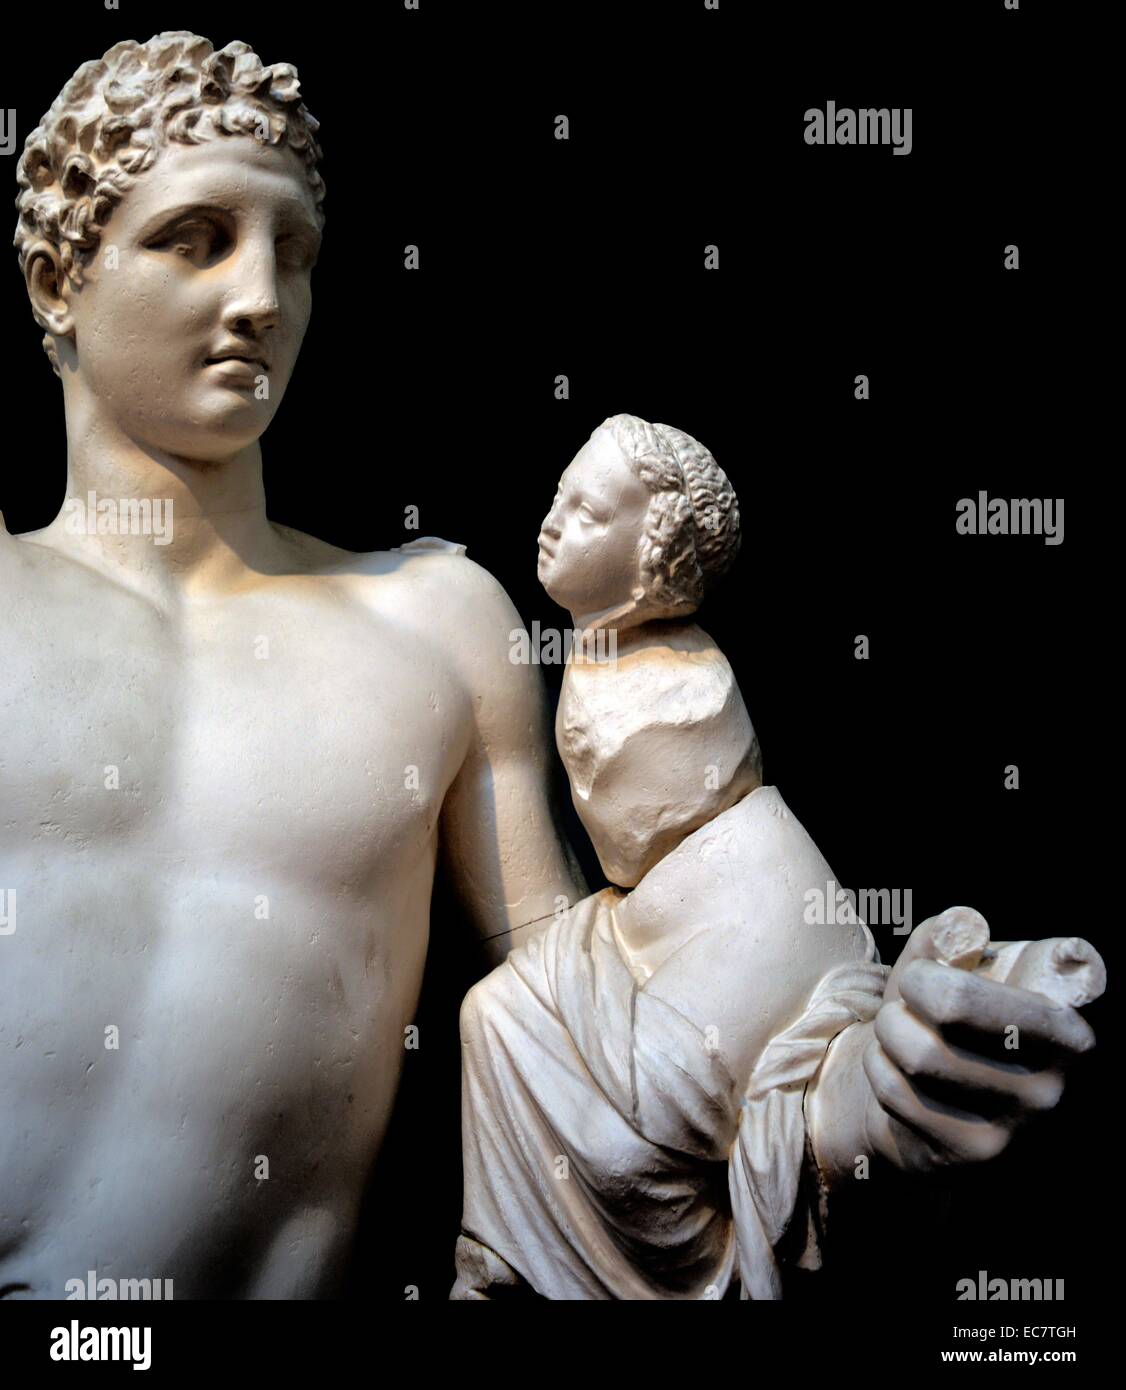 Hermes holding infant Dionysos. From Olympia, c340 BC. Hermes probably held grapes in his raised right hand, dangling them in front of the baby Dionysos. The statue was found in the temple of Hera, at Olympia, where Pausanias saw it in the 2nd century AD.  He said it is a work of Praxiteles, famous Athenian sculptor of the 4th century BC Stock Photo